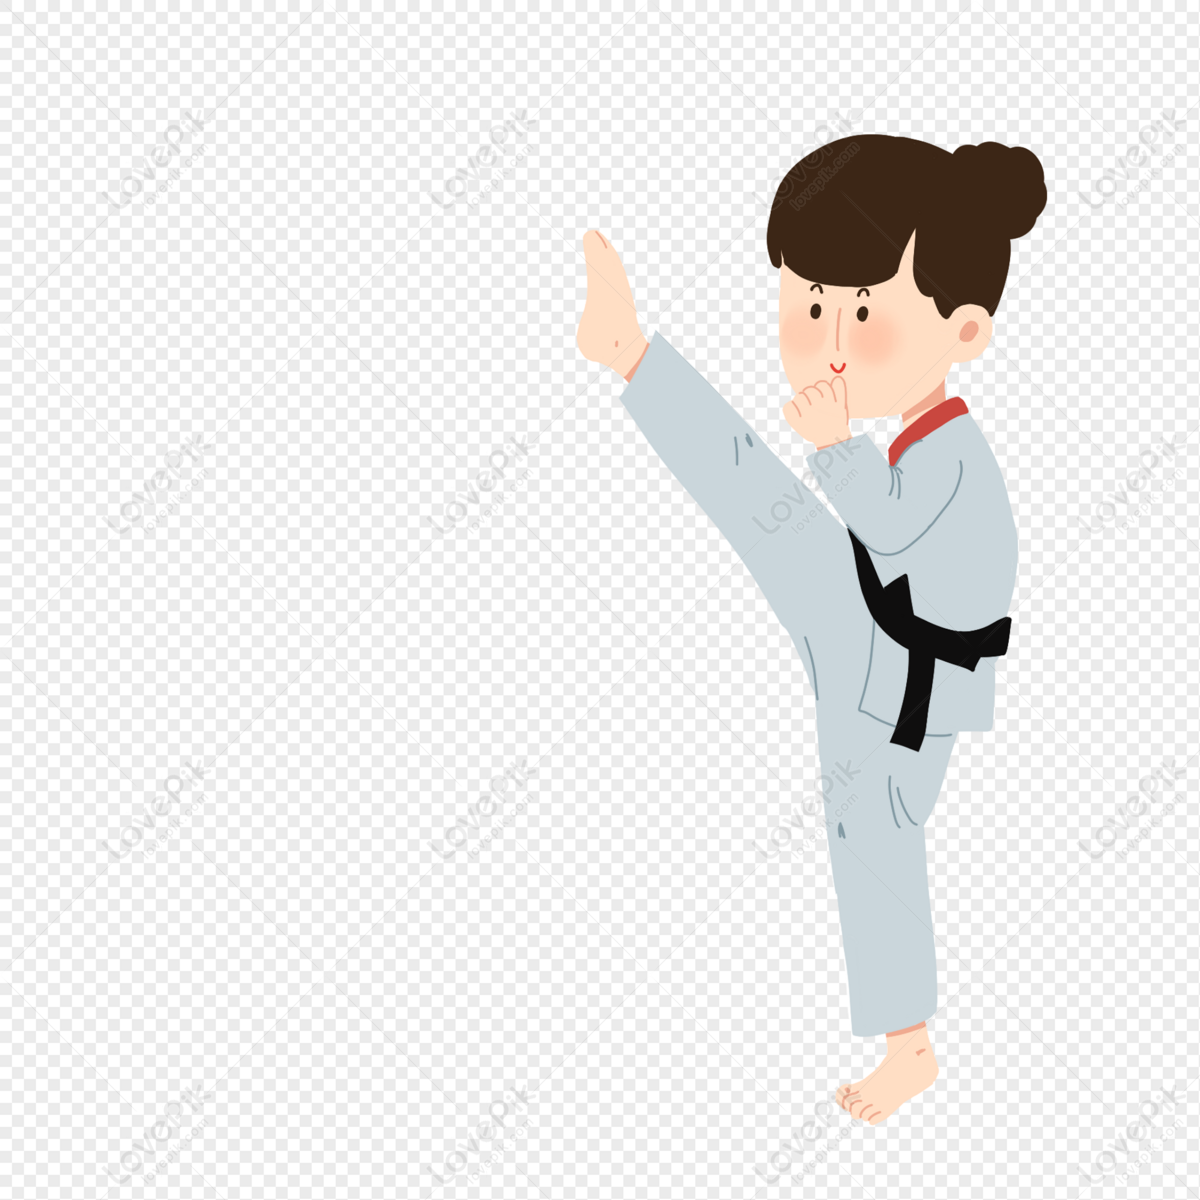 Taekwondo Cartoon PNG Hd Transparent Image And Clipart Image For Free  Download - Lovepik | 401351414